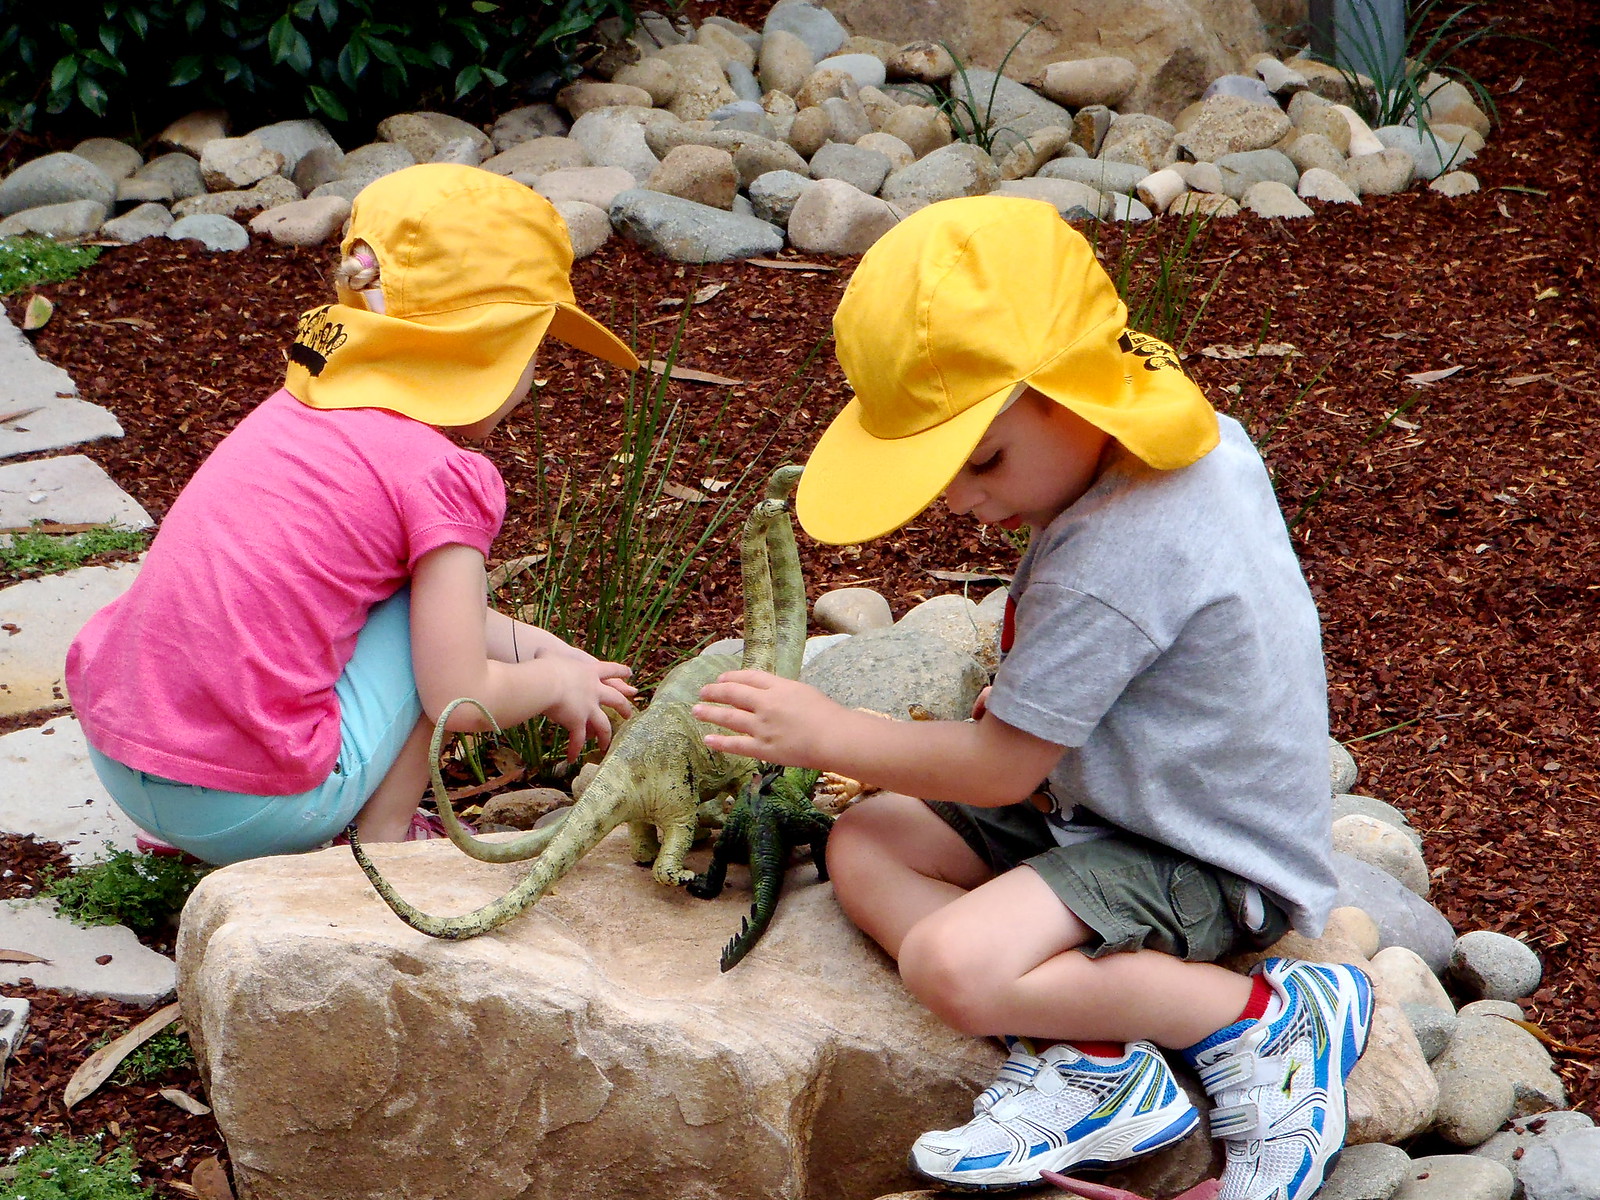 playing together with the dinosaurs